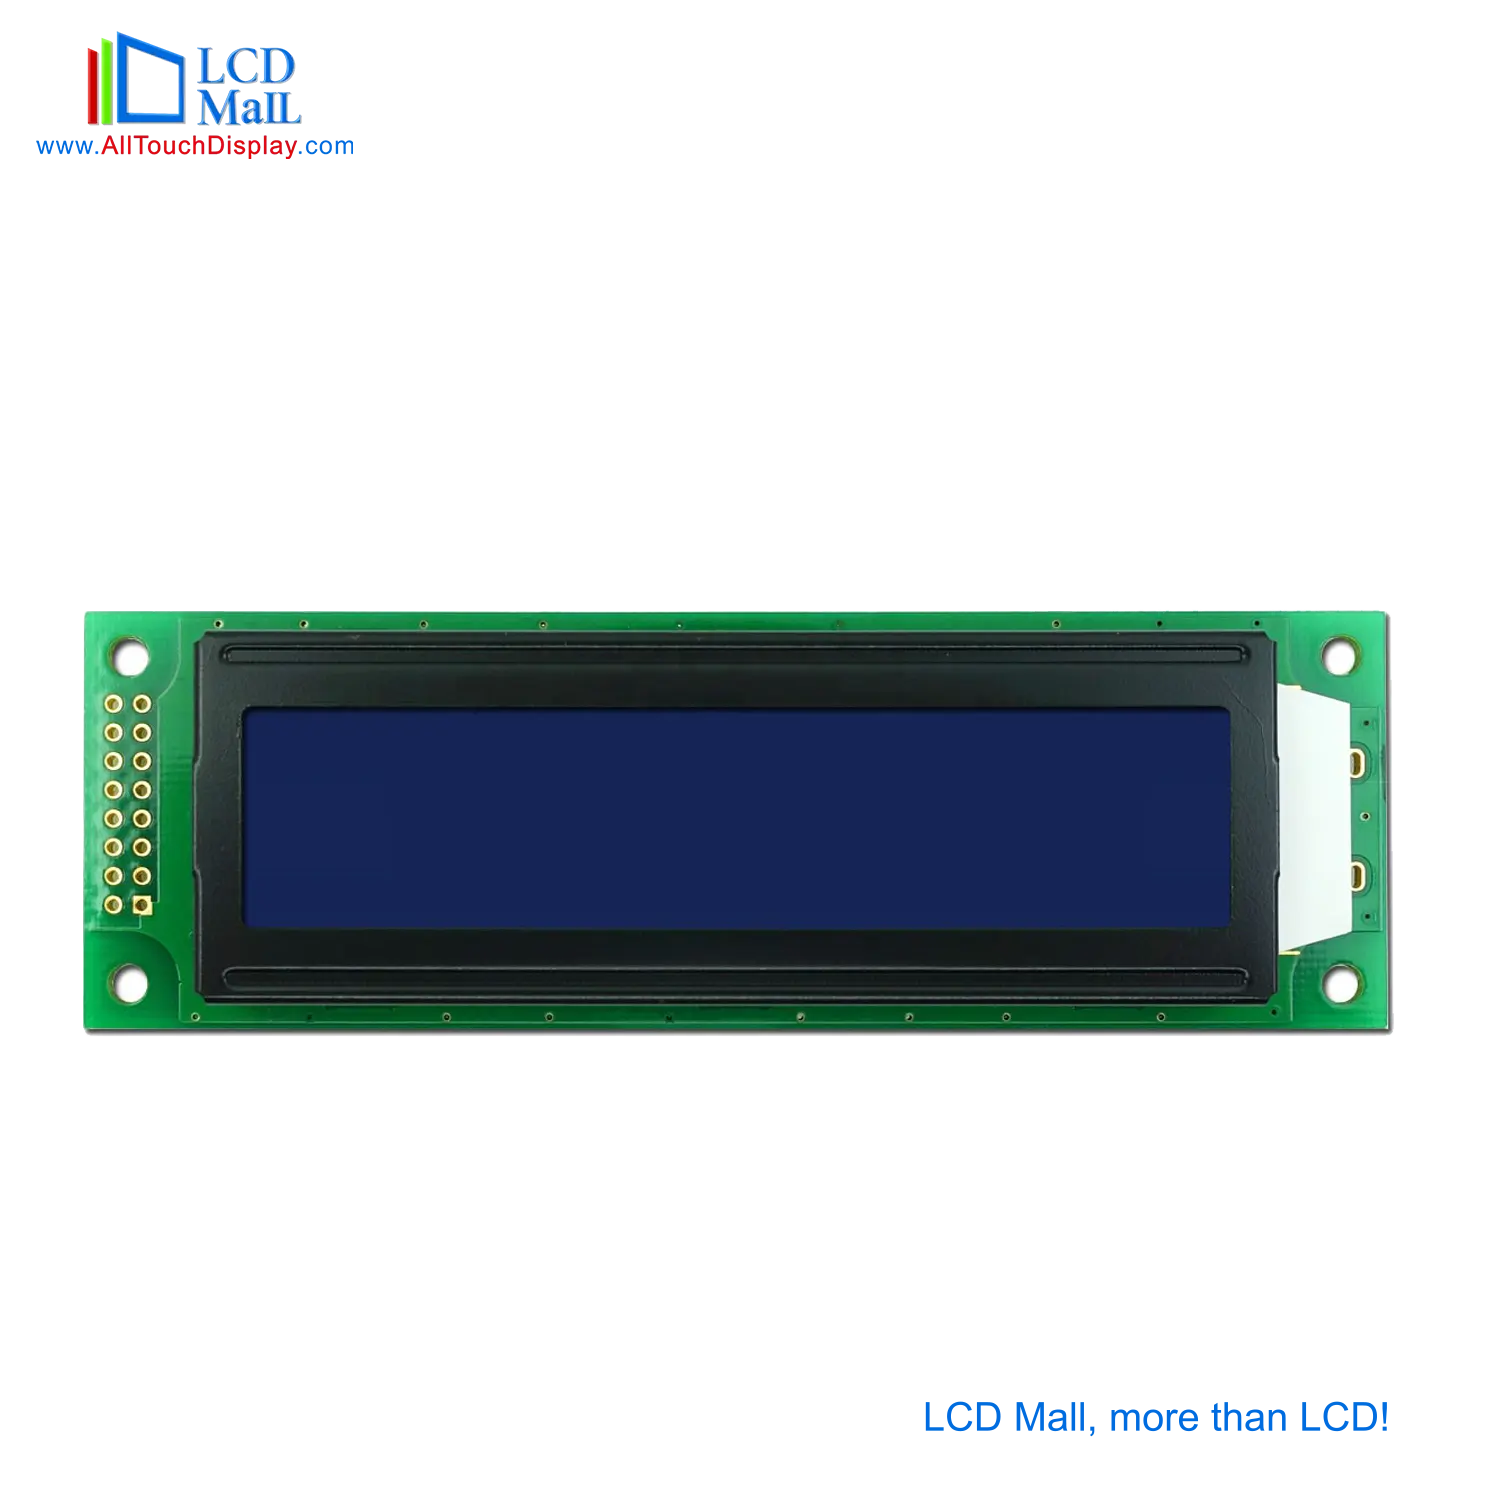 20X2 Character LCD Display Module LCD for Industrial Equipment Medical